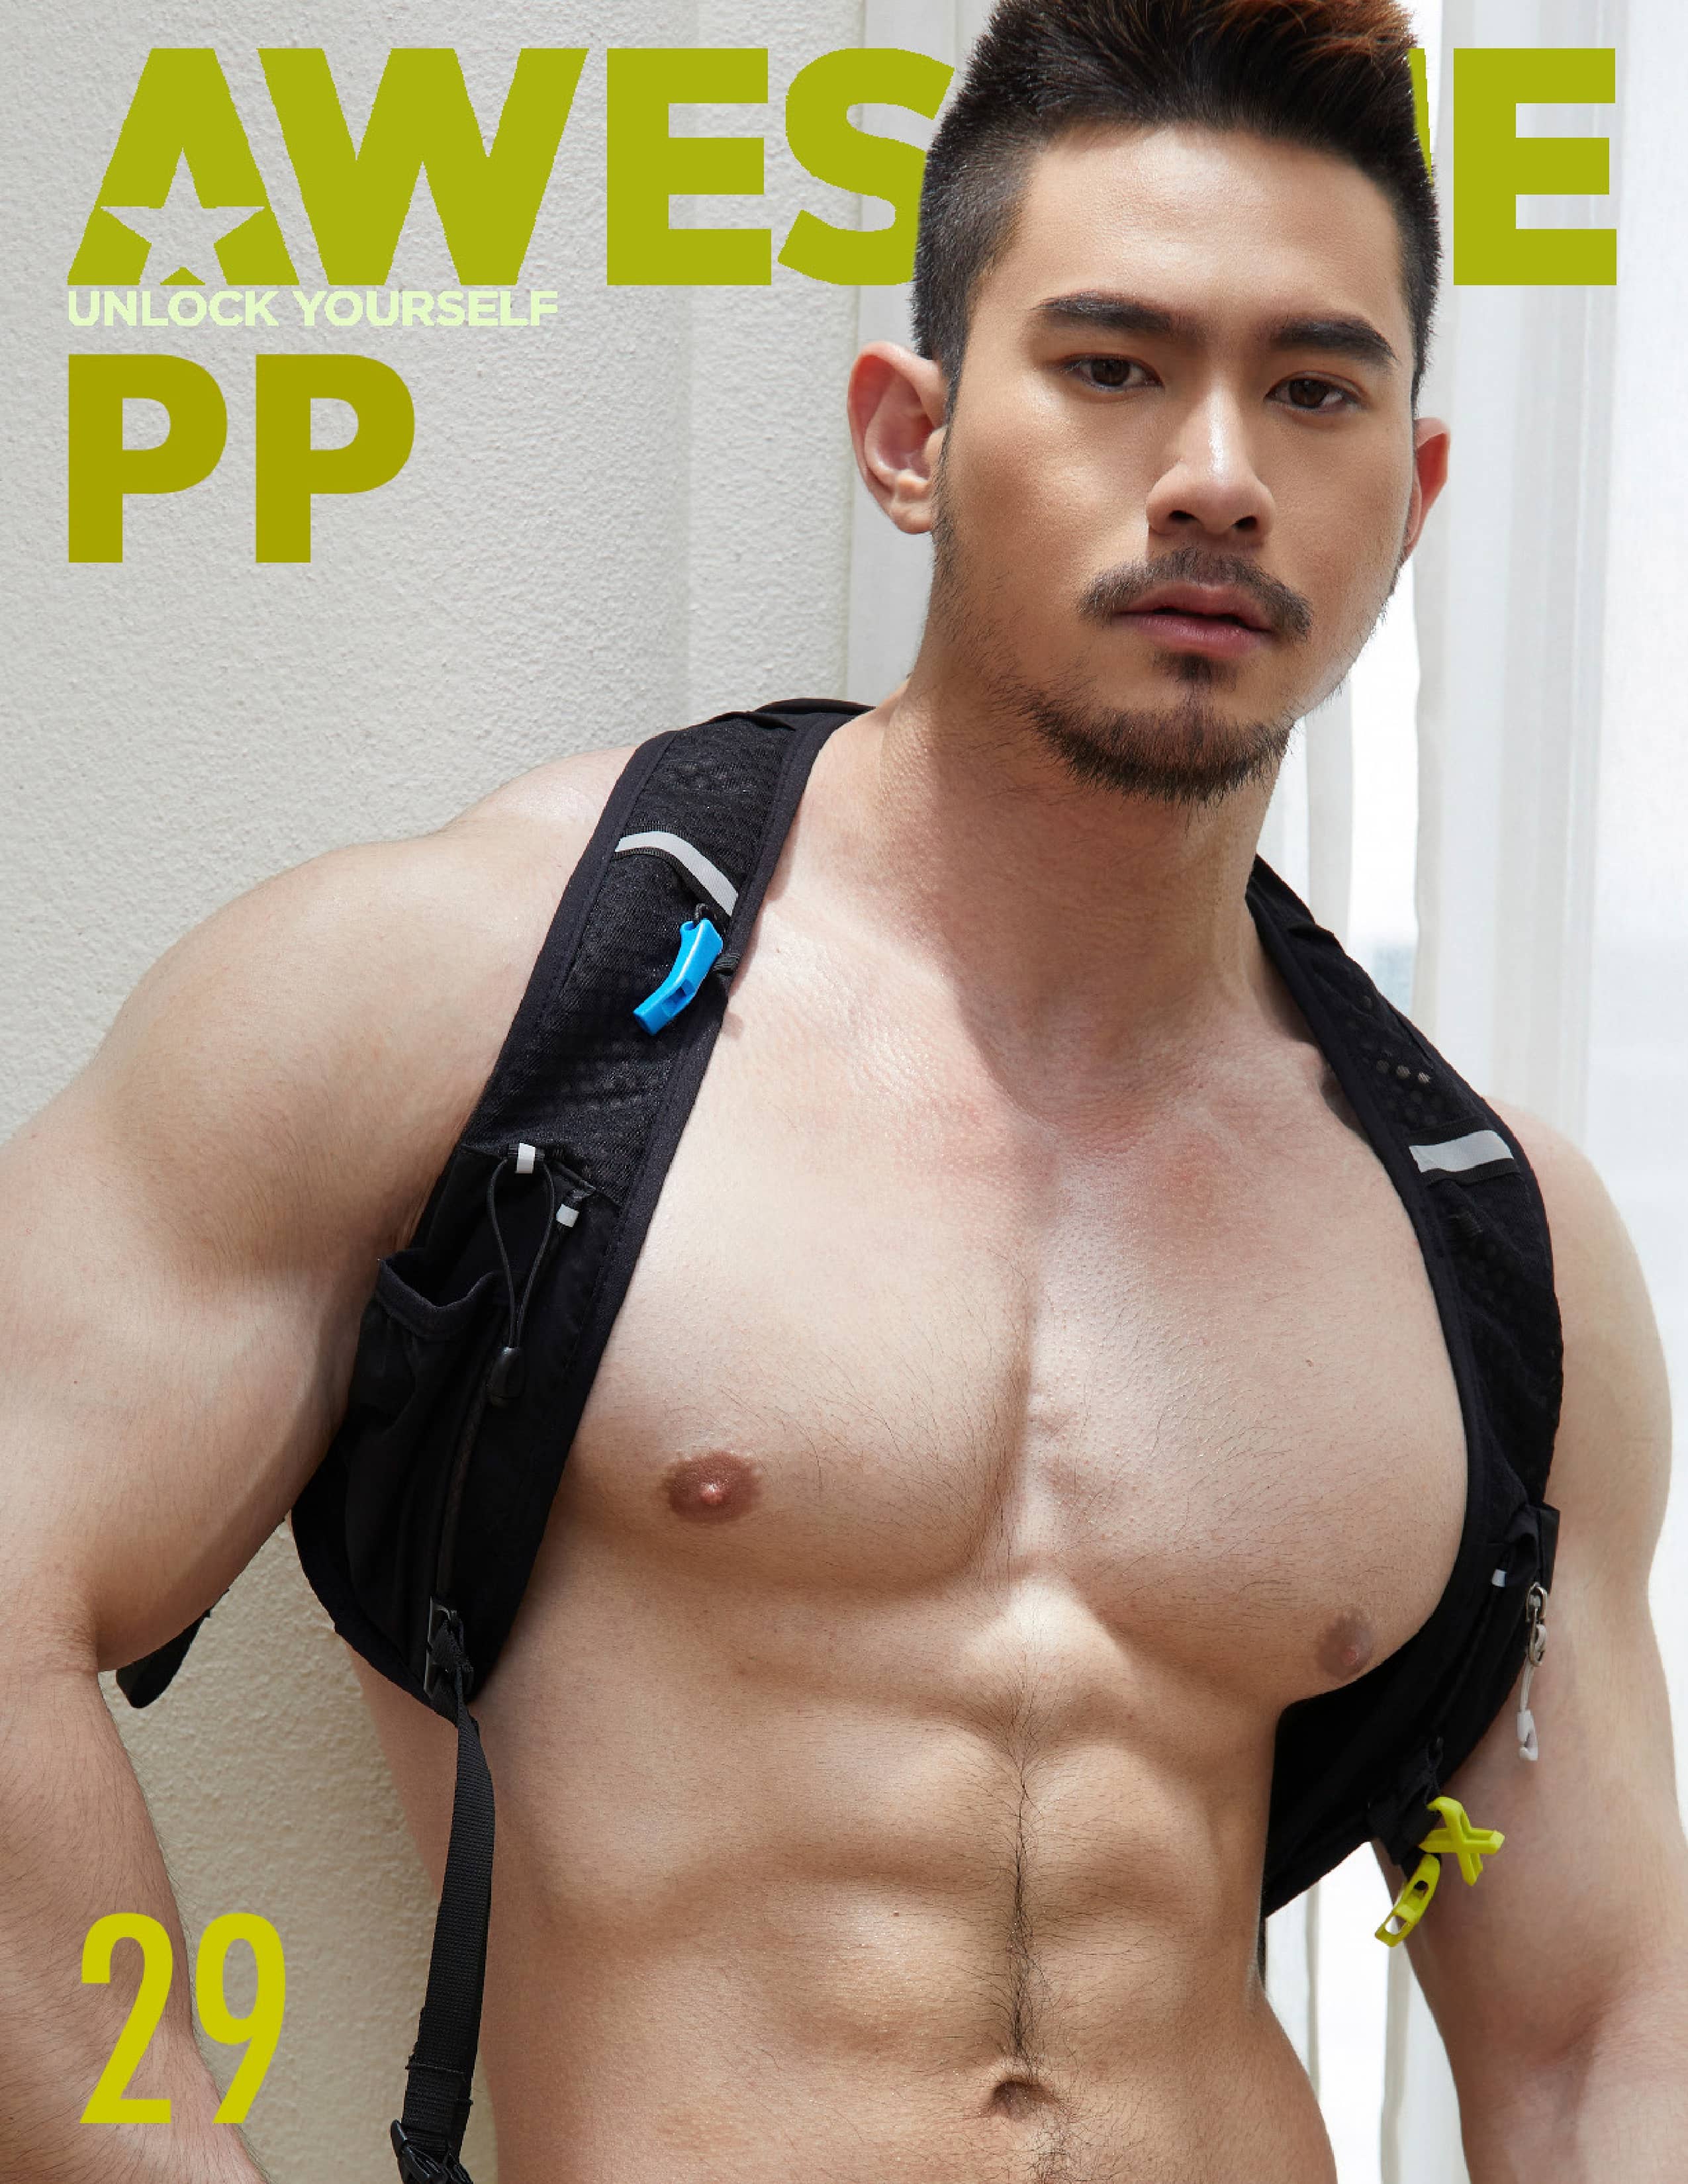 Awesome 29 – PP ‖ R+【PHOTO+VIDEO】